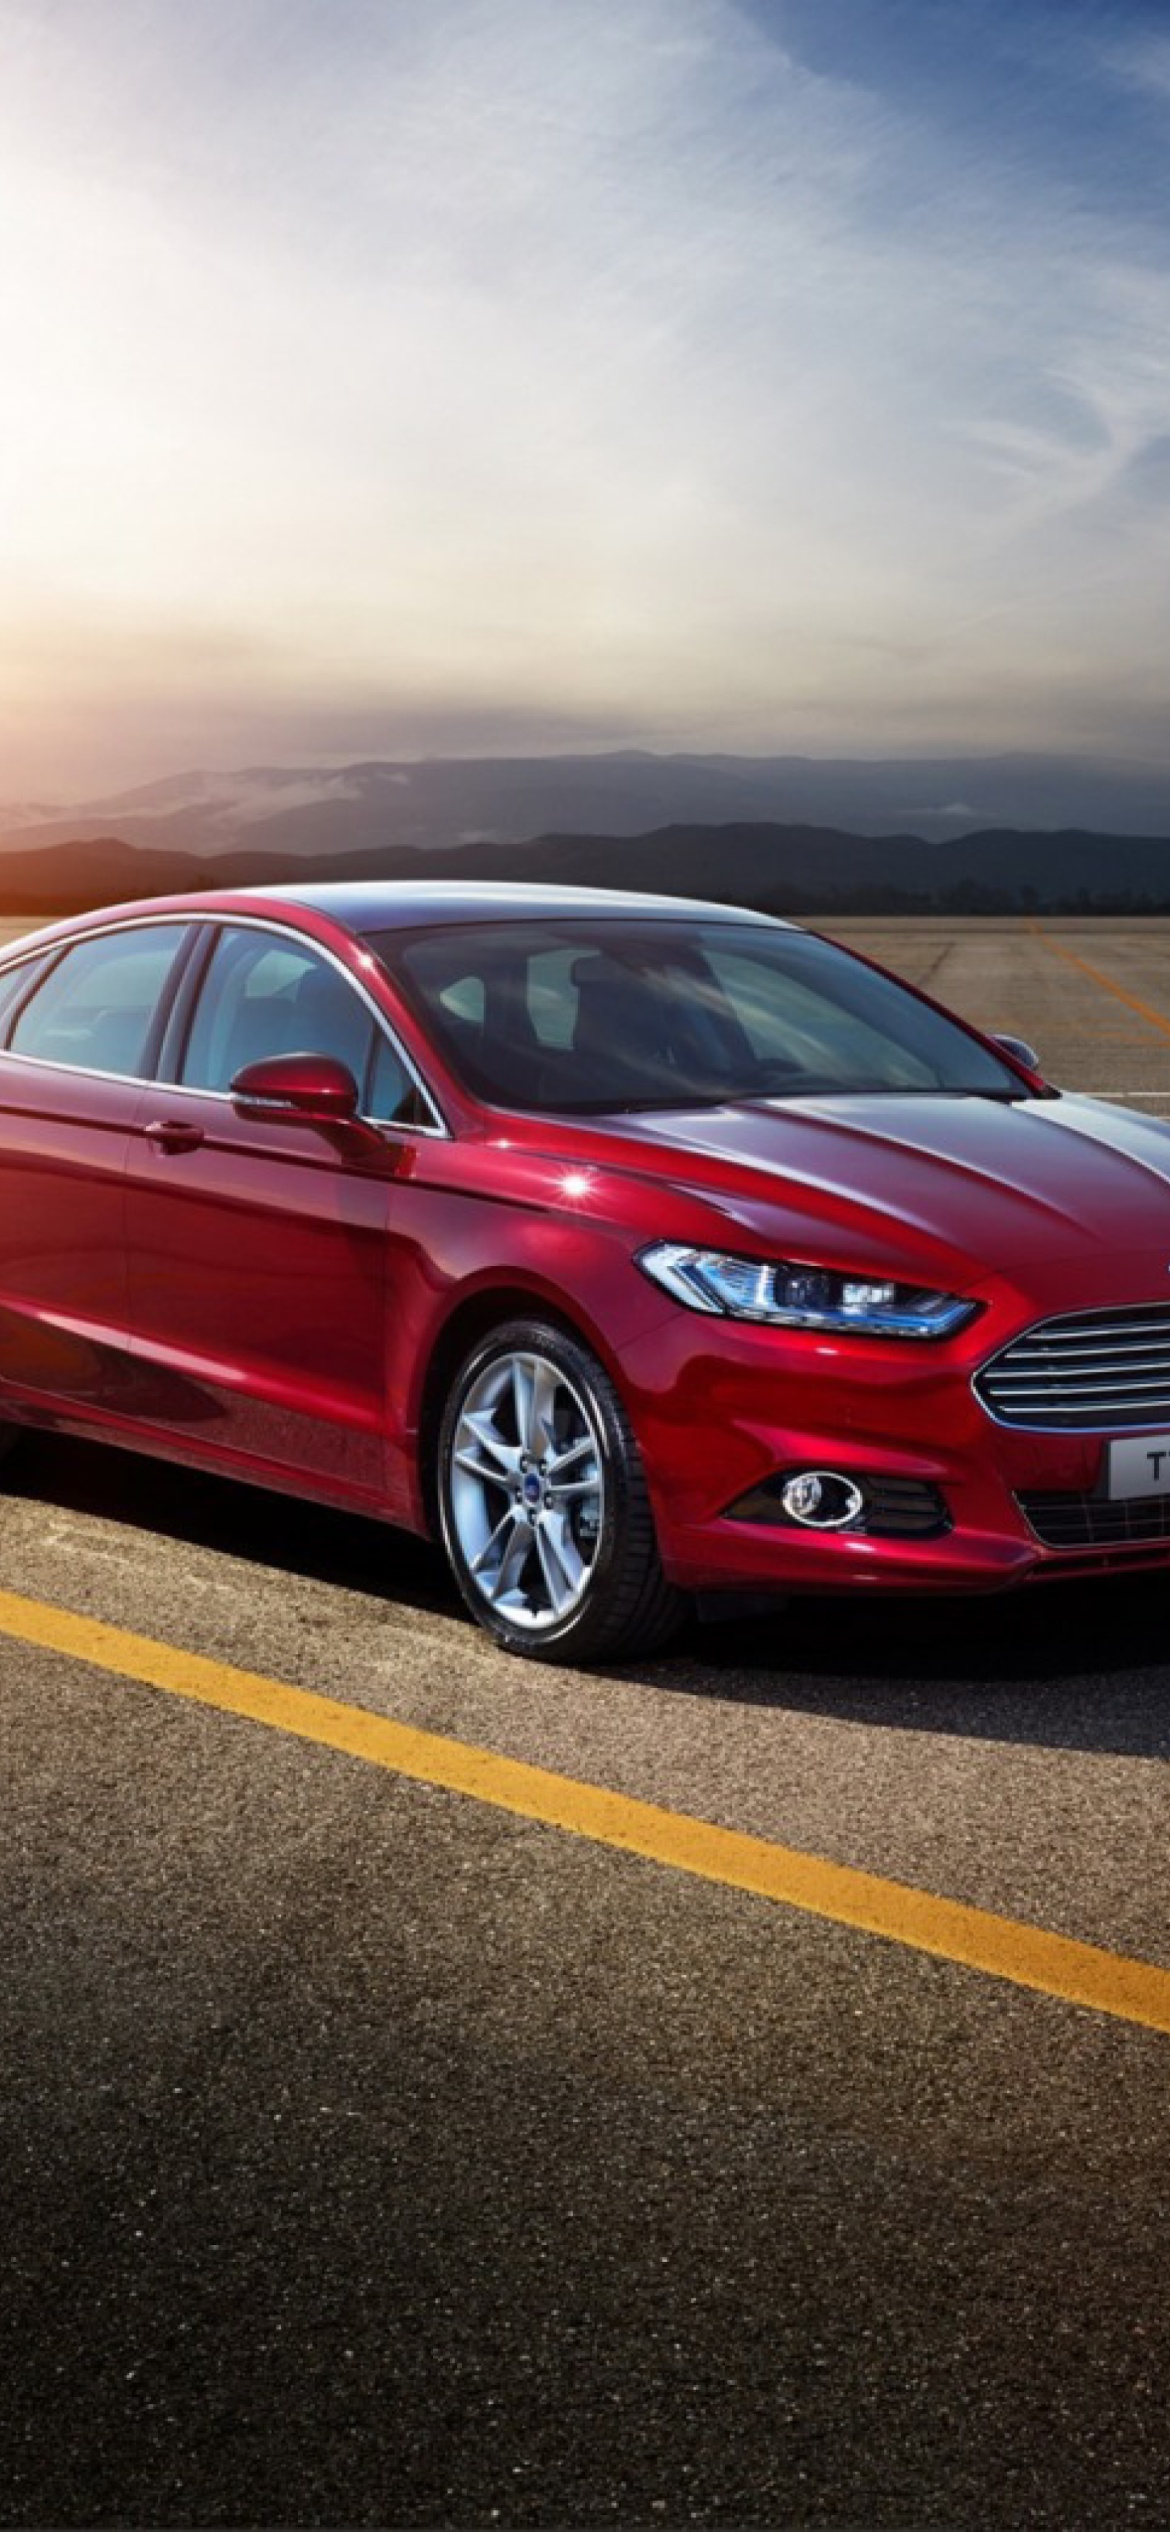 Ford Mondeo 2015 wallpaper 1170x2532